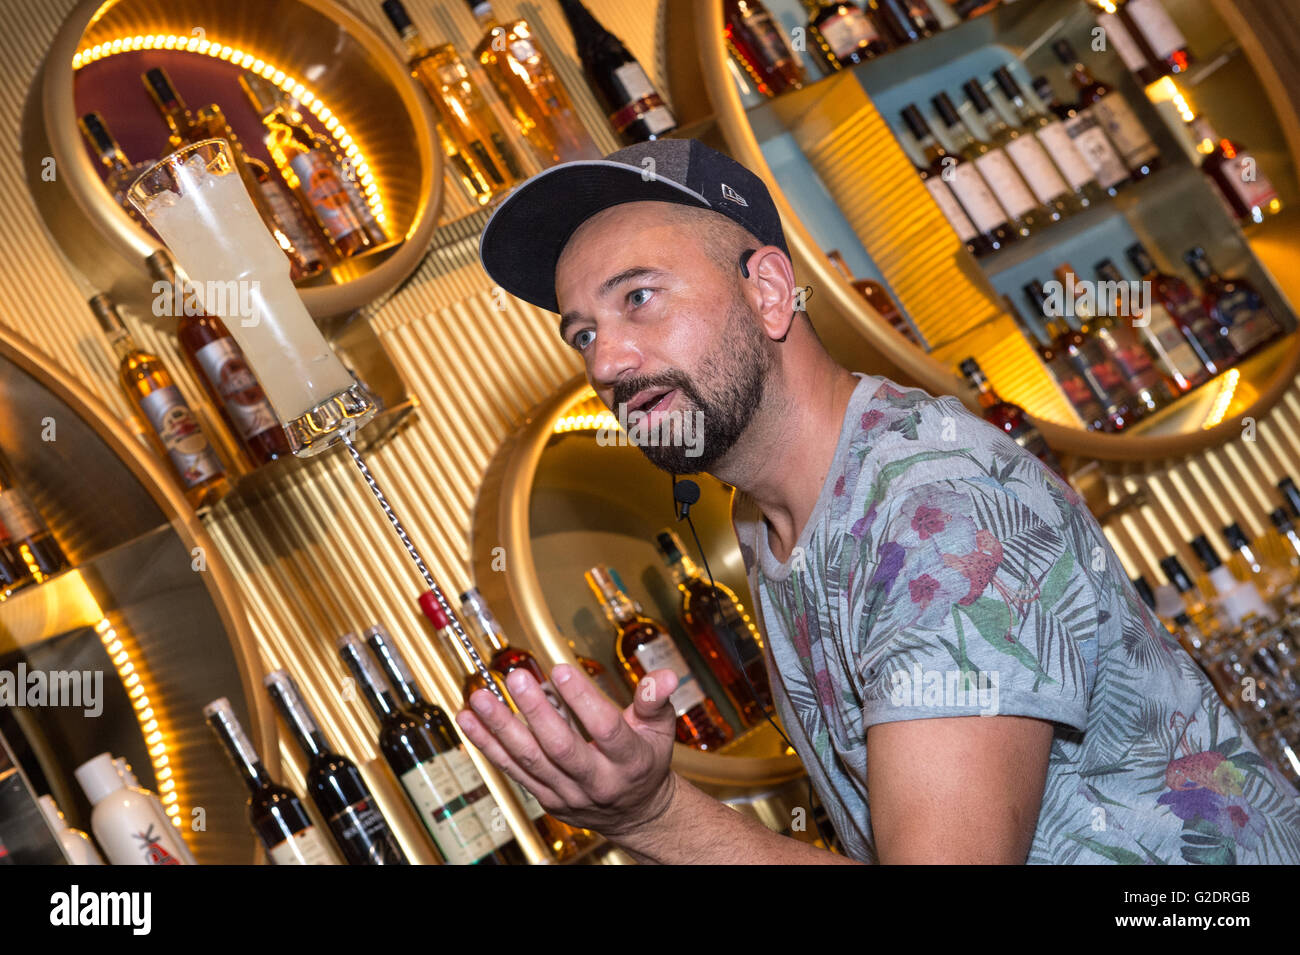 Nicolas Saint-Jean the worlds renowned 'Flair' bartender puts on a show of  his signature move- supporting a cocktail on a bar sp Stock Photo - Alamy